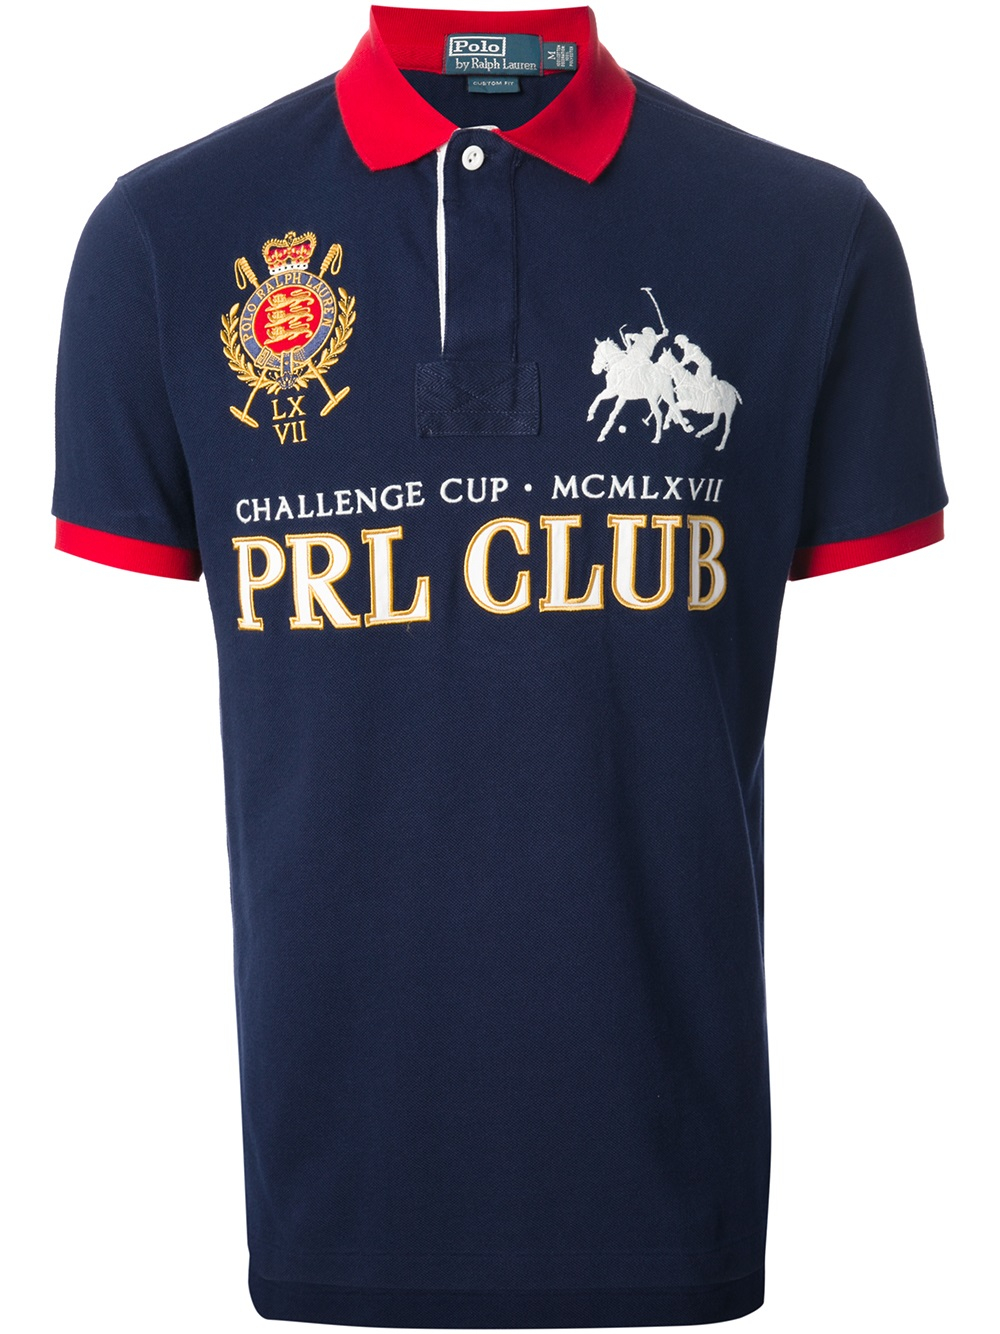 Polo Ralph Lauren Prl Club Polo Shirt in Blue for Men - Lyst